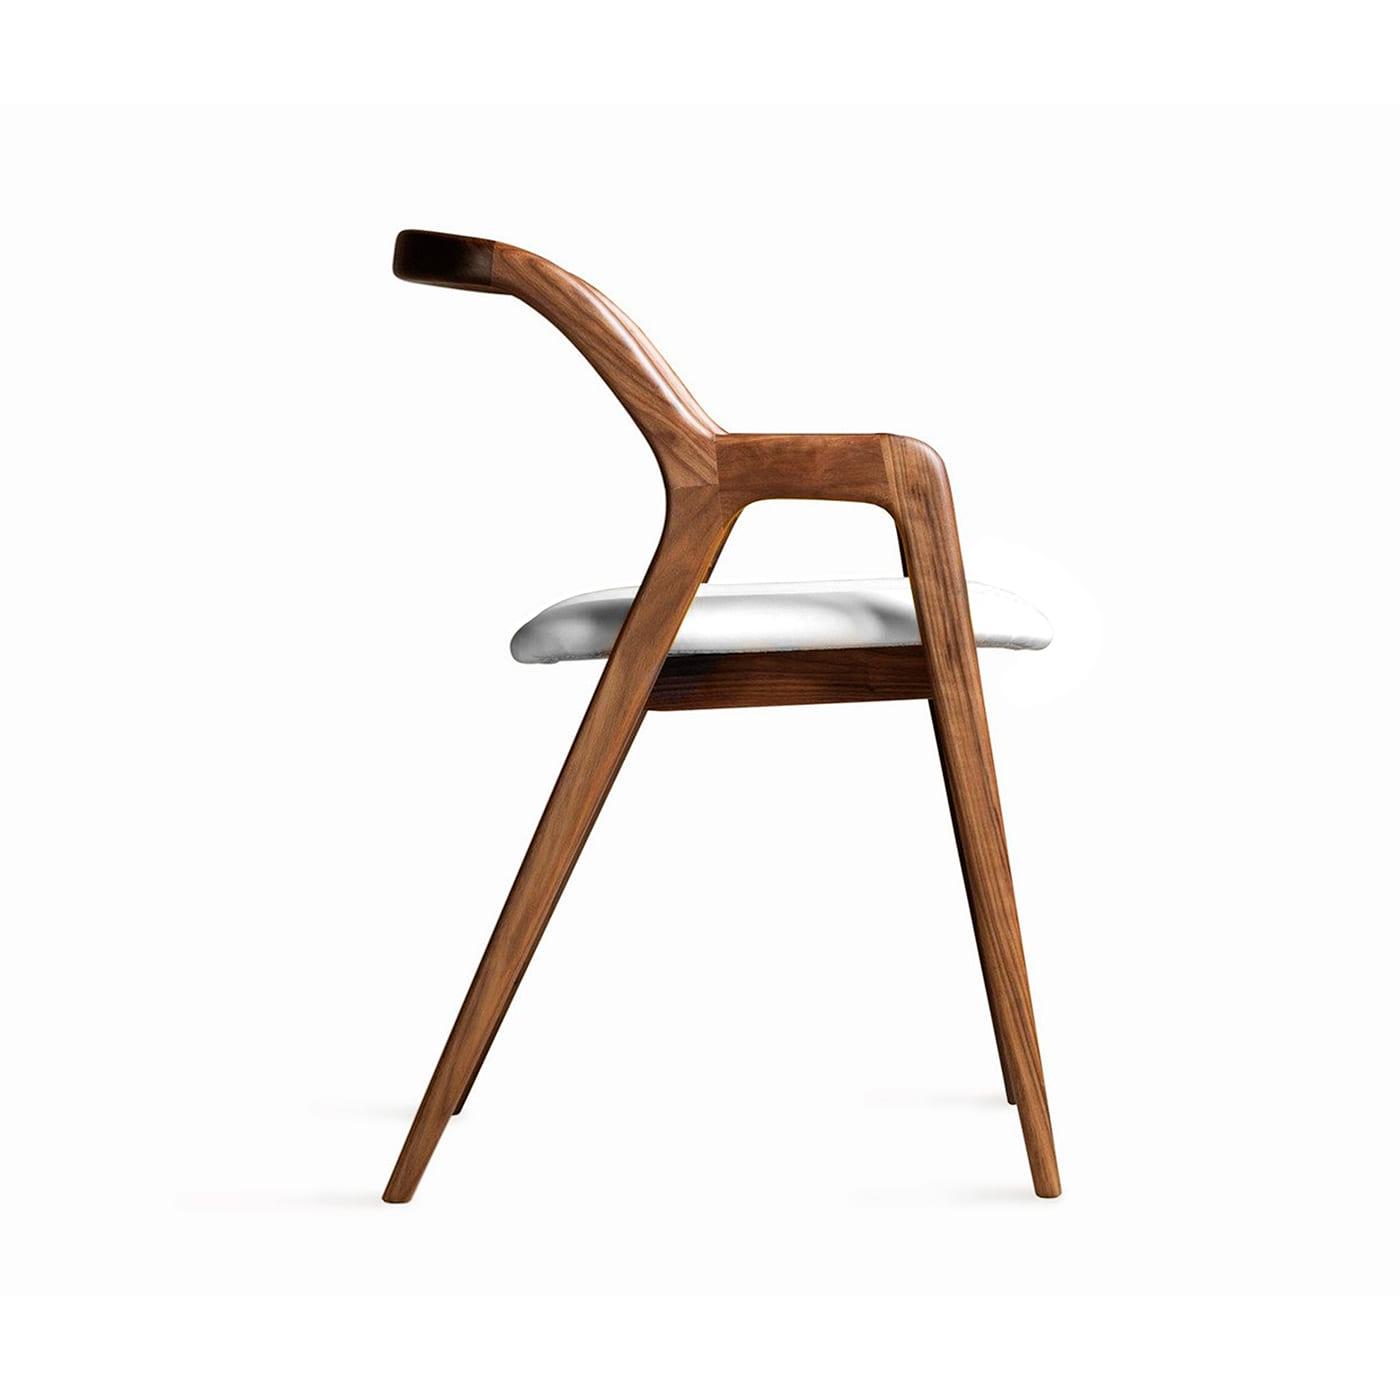 In Breve Natural Solid Walnut Chair ☞ Upholstery: Leather PANDORA 622